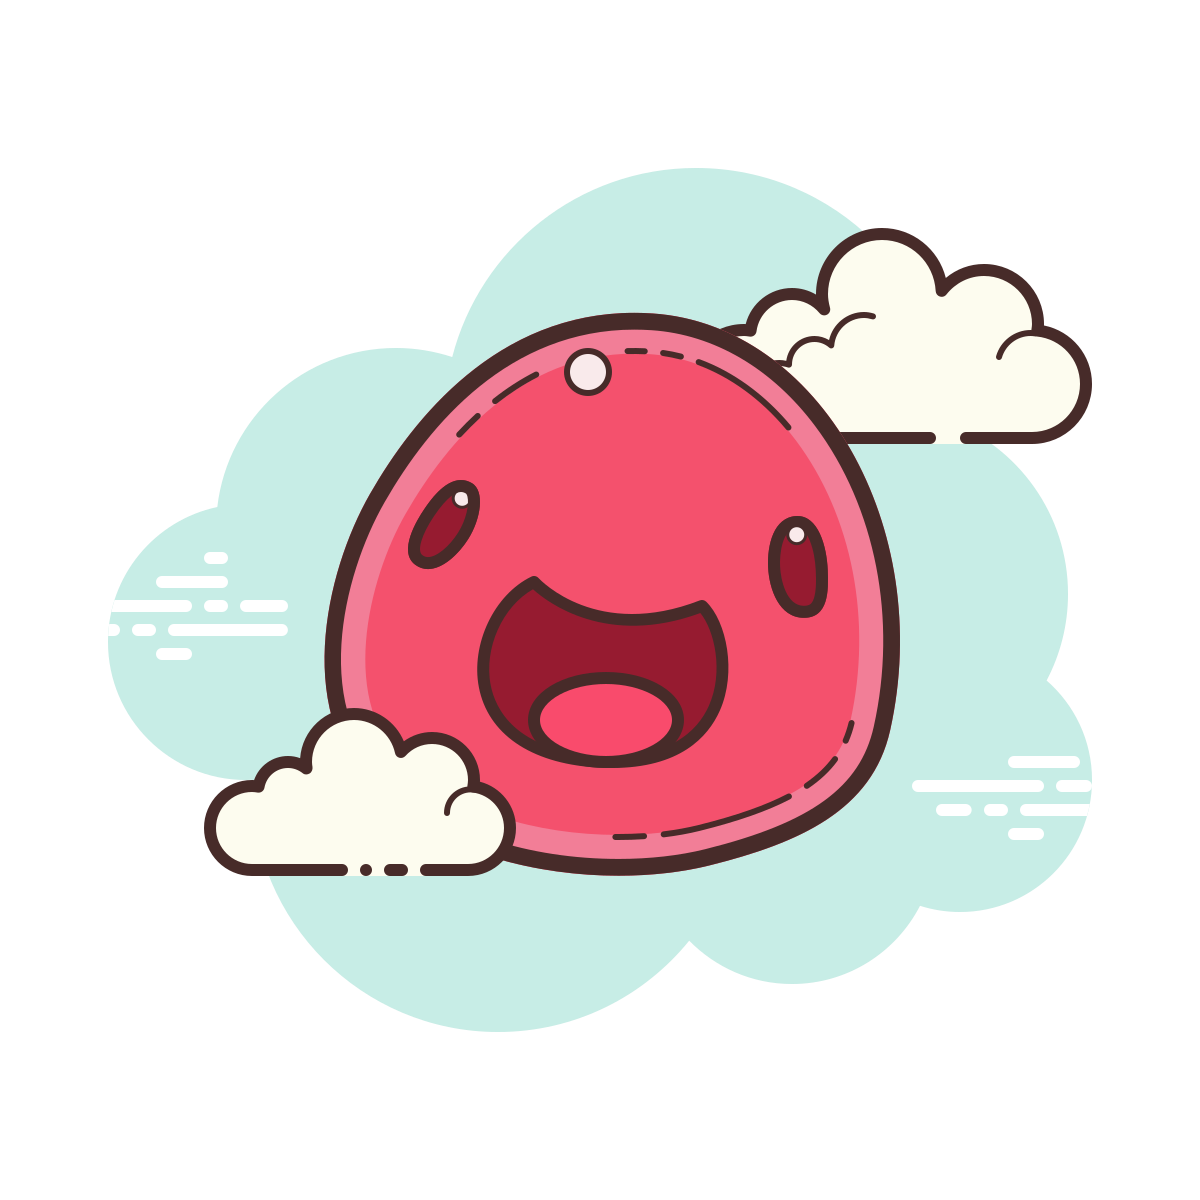 Slime Rancher icon in Cloud Style